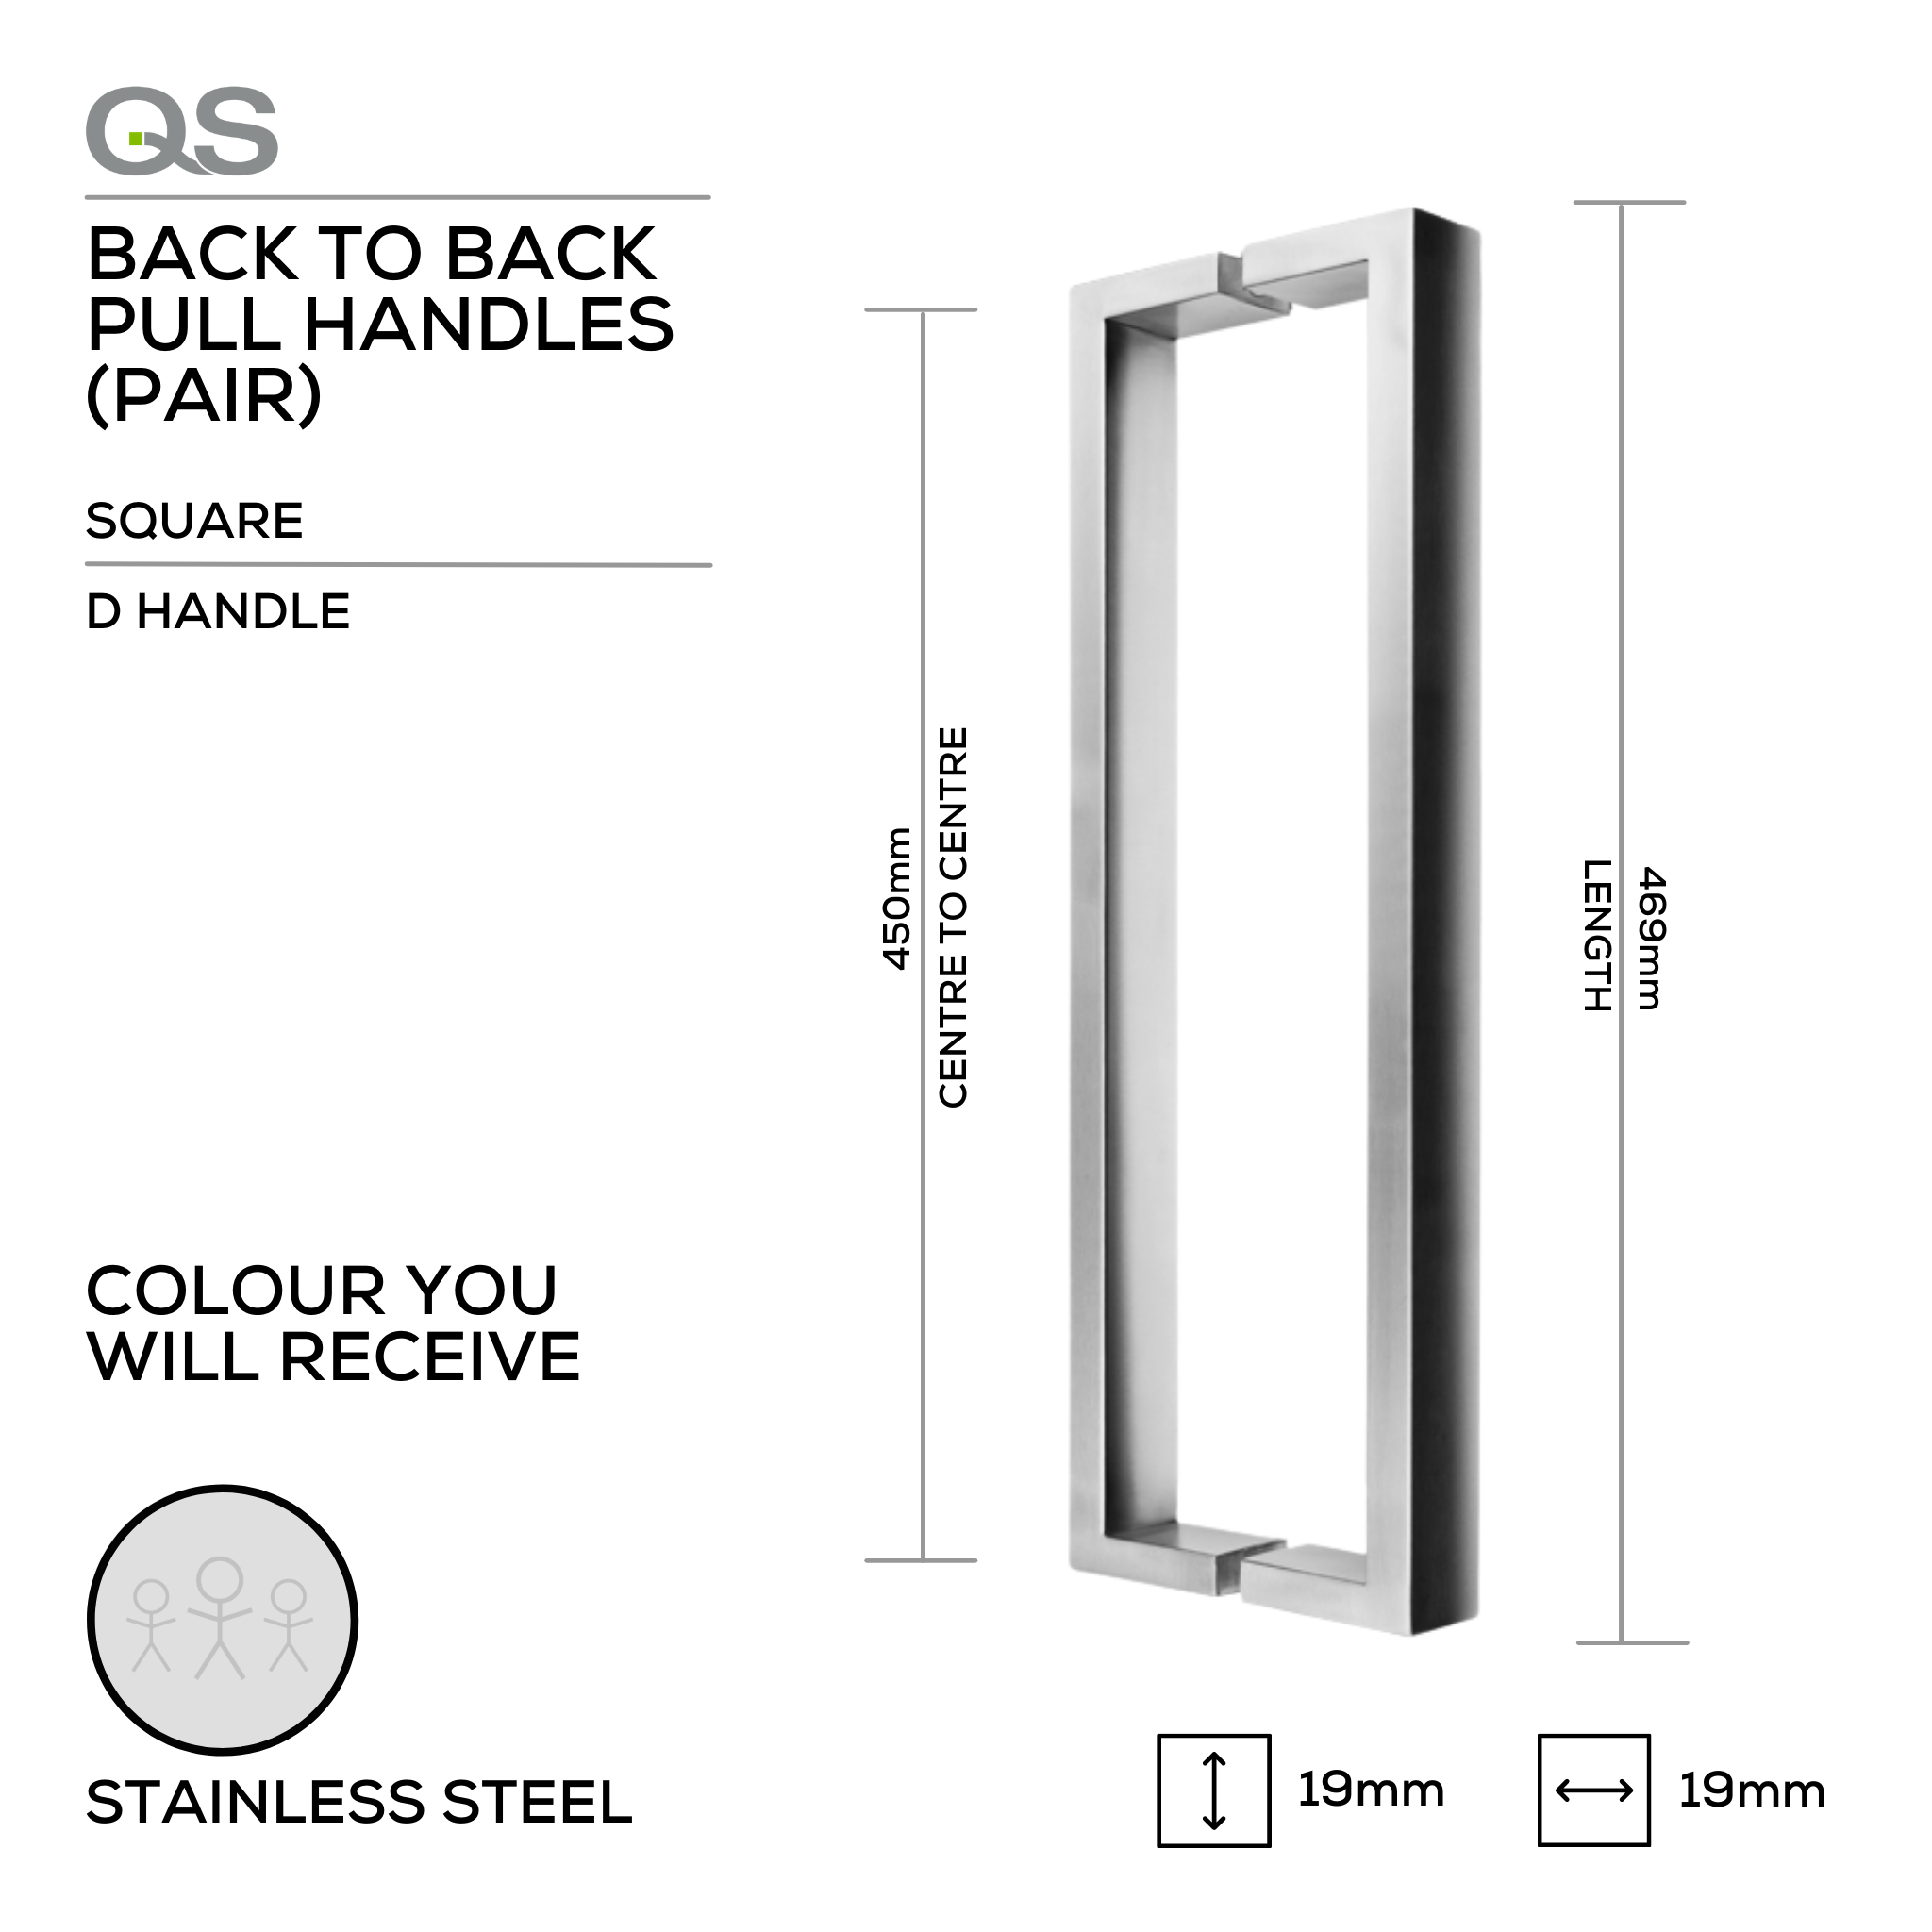 QS2623 SQ SECT, Pull Handle, Square, D Handle, BTB, 19mm (d) x 469mm (l) x 450mm (ctc), Stainless Steel, QS